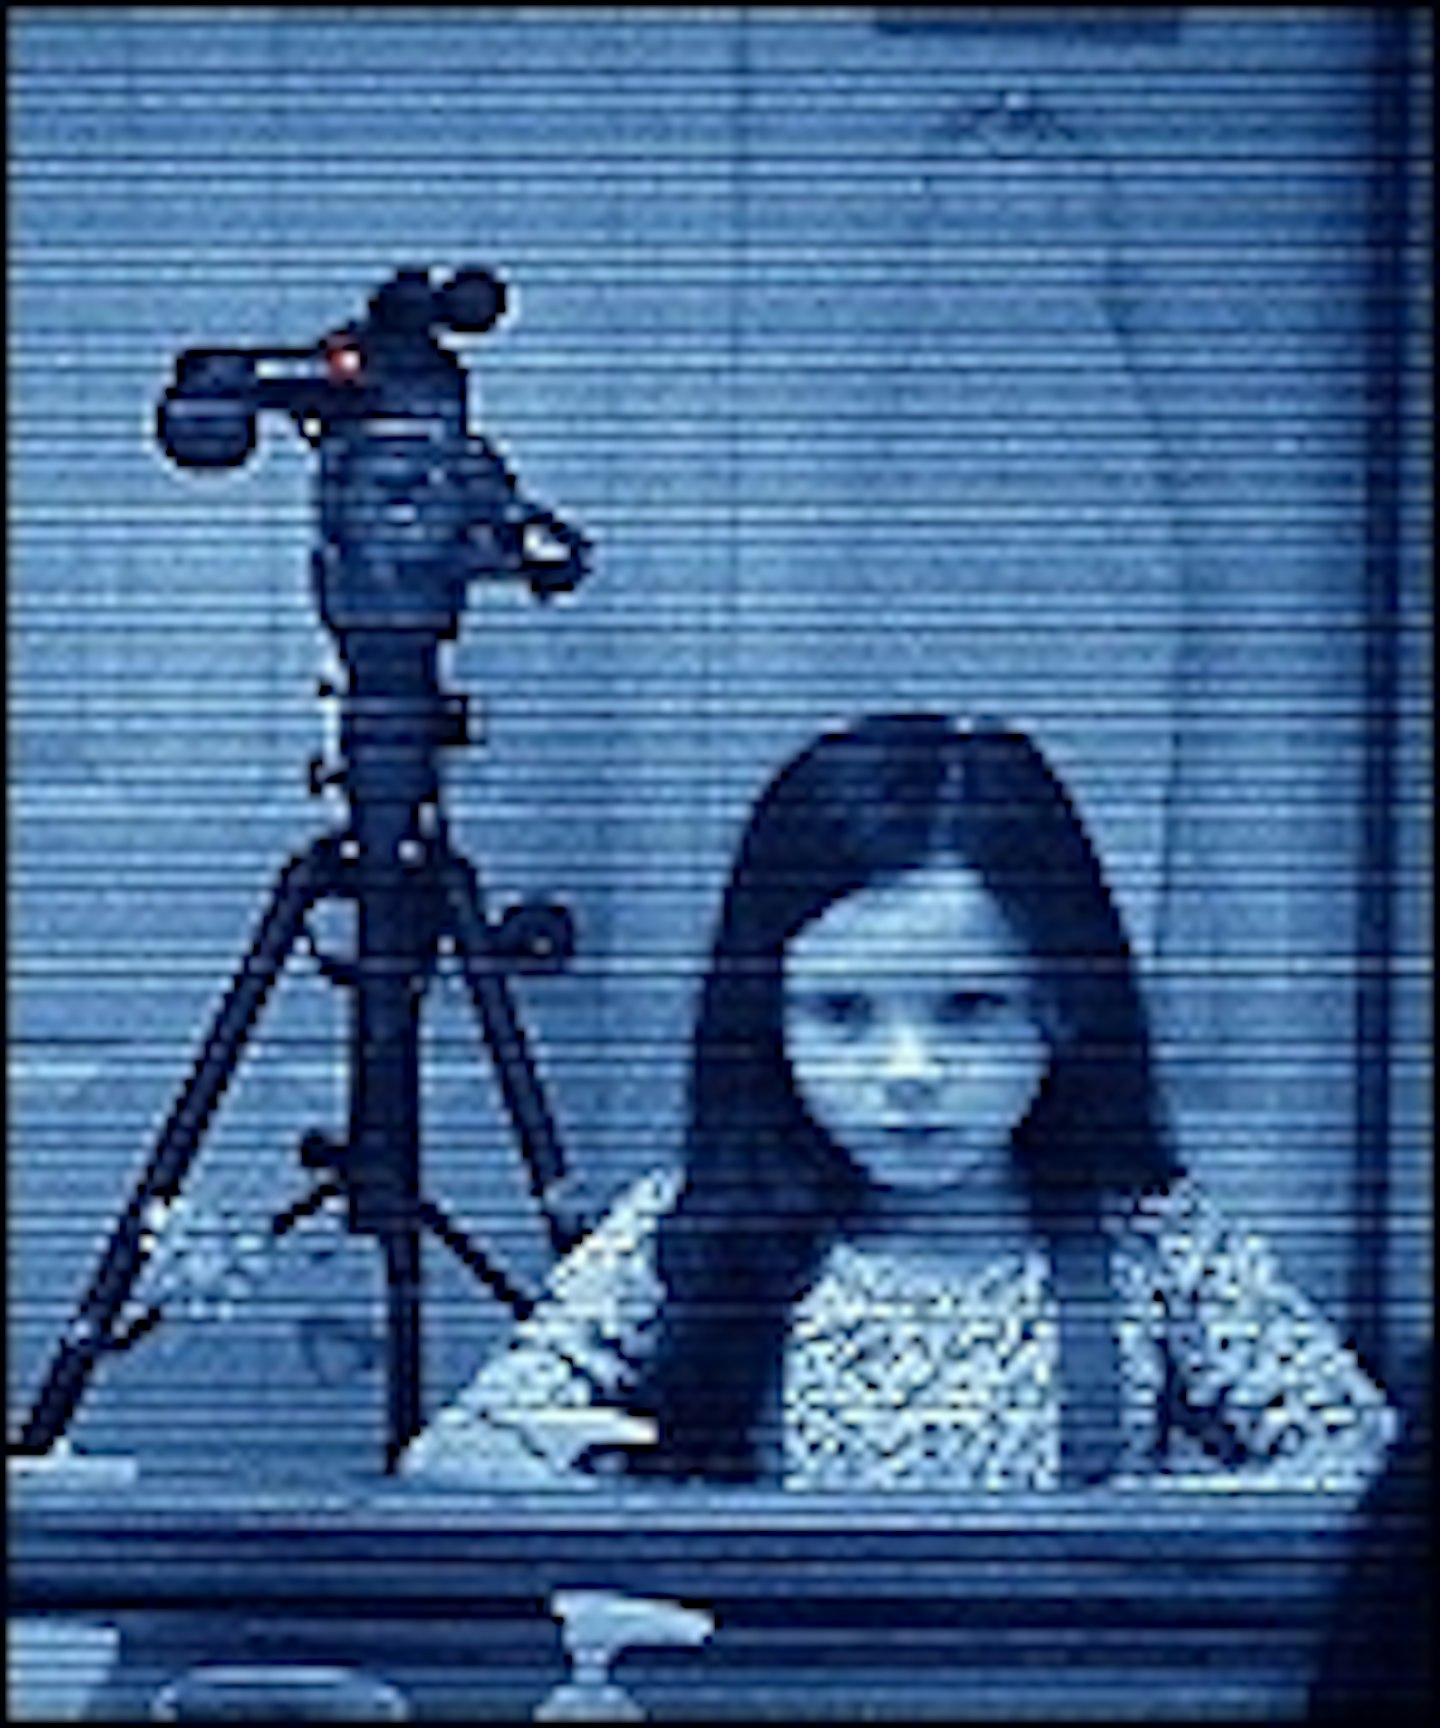 Paranormal Activity 3 Wins US Box Office